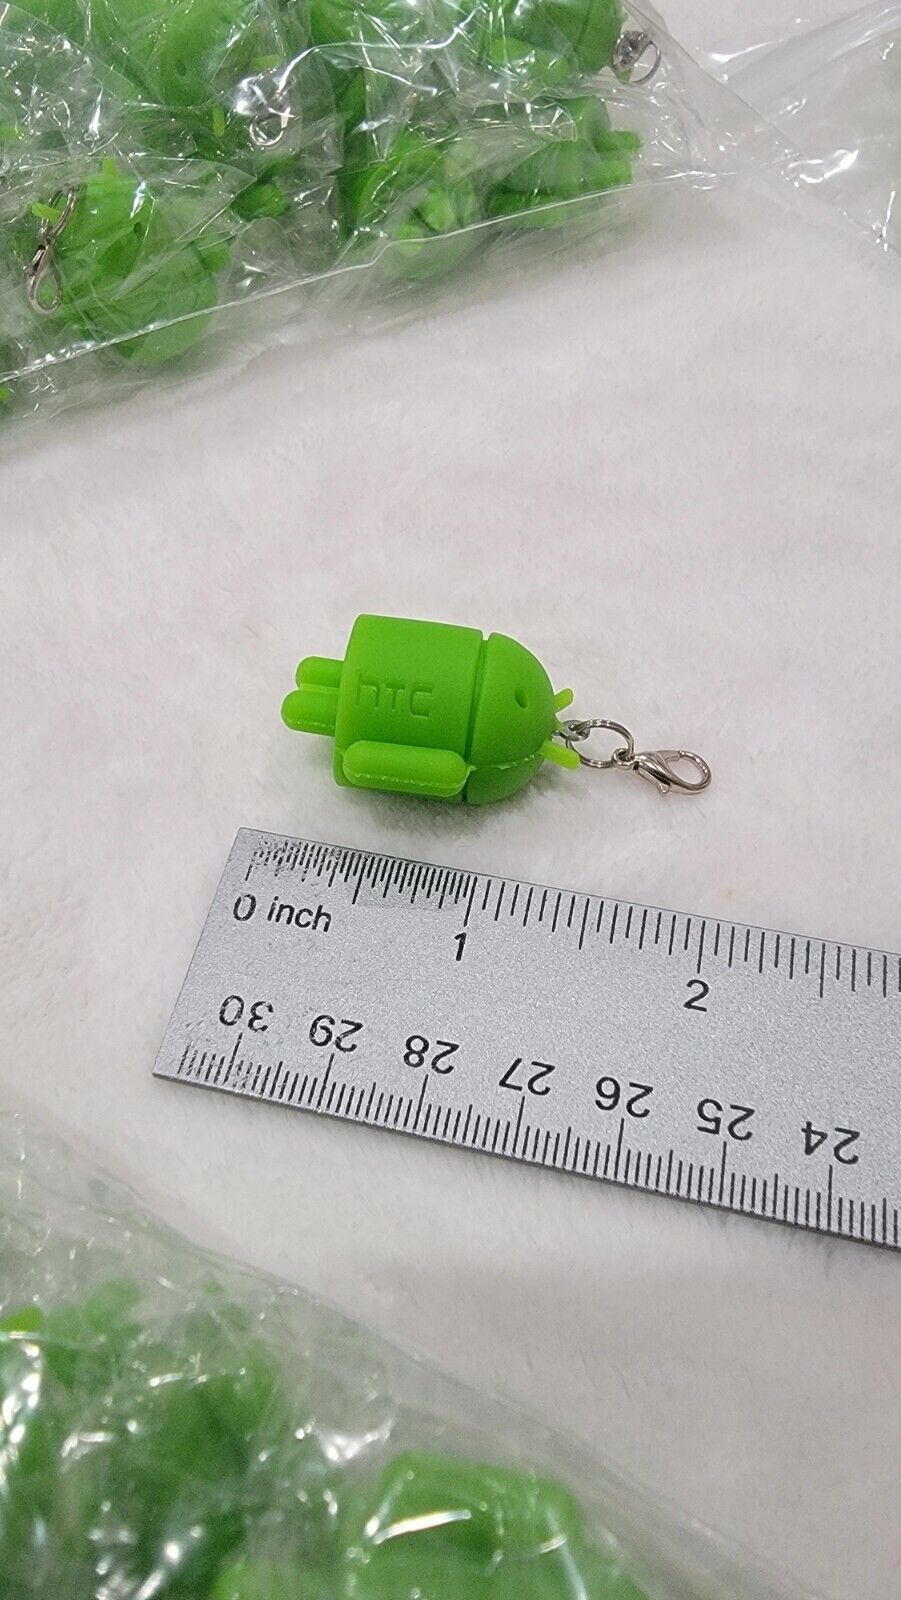 New Lot Of 500 Rubber Robot Google Android Key Chain Charm Mini Doll Green HTC